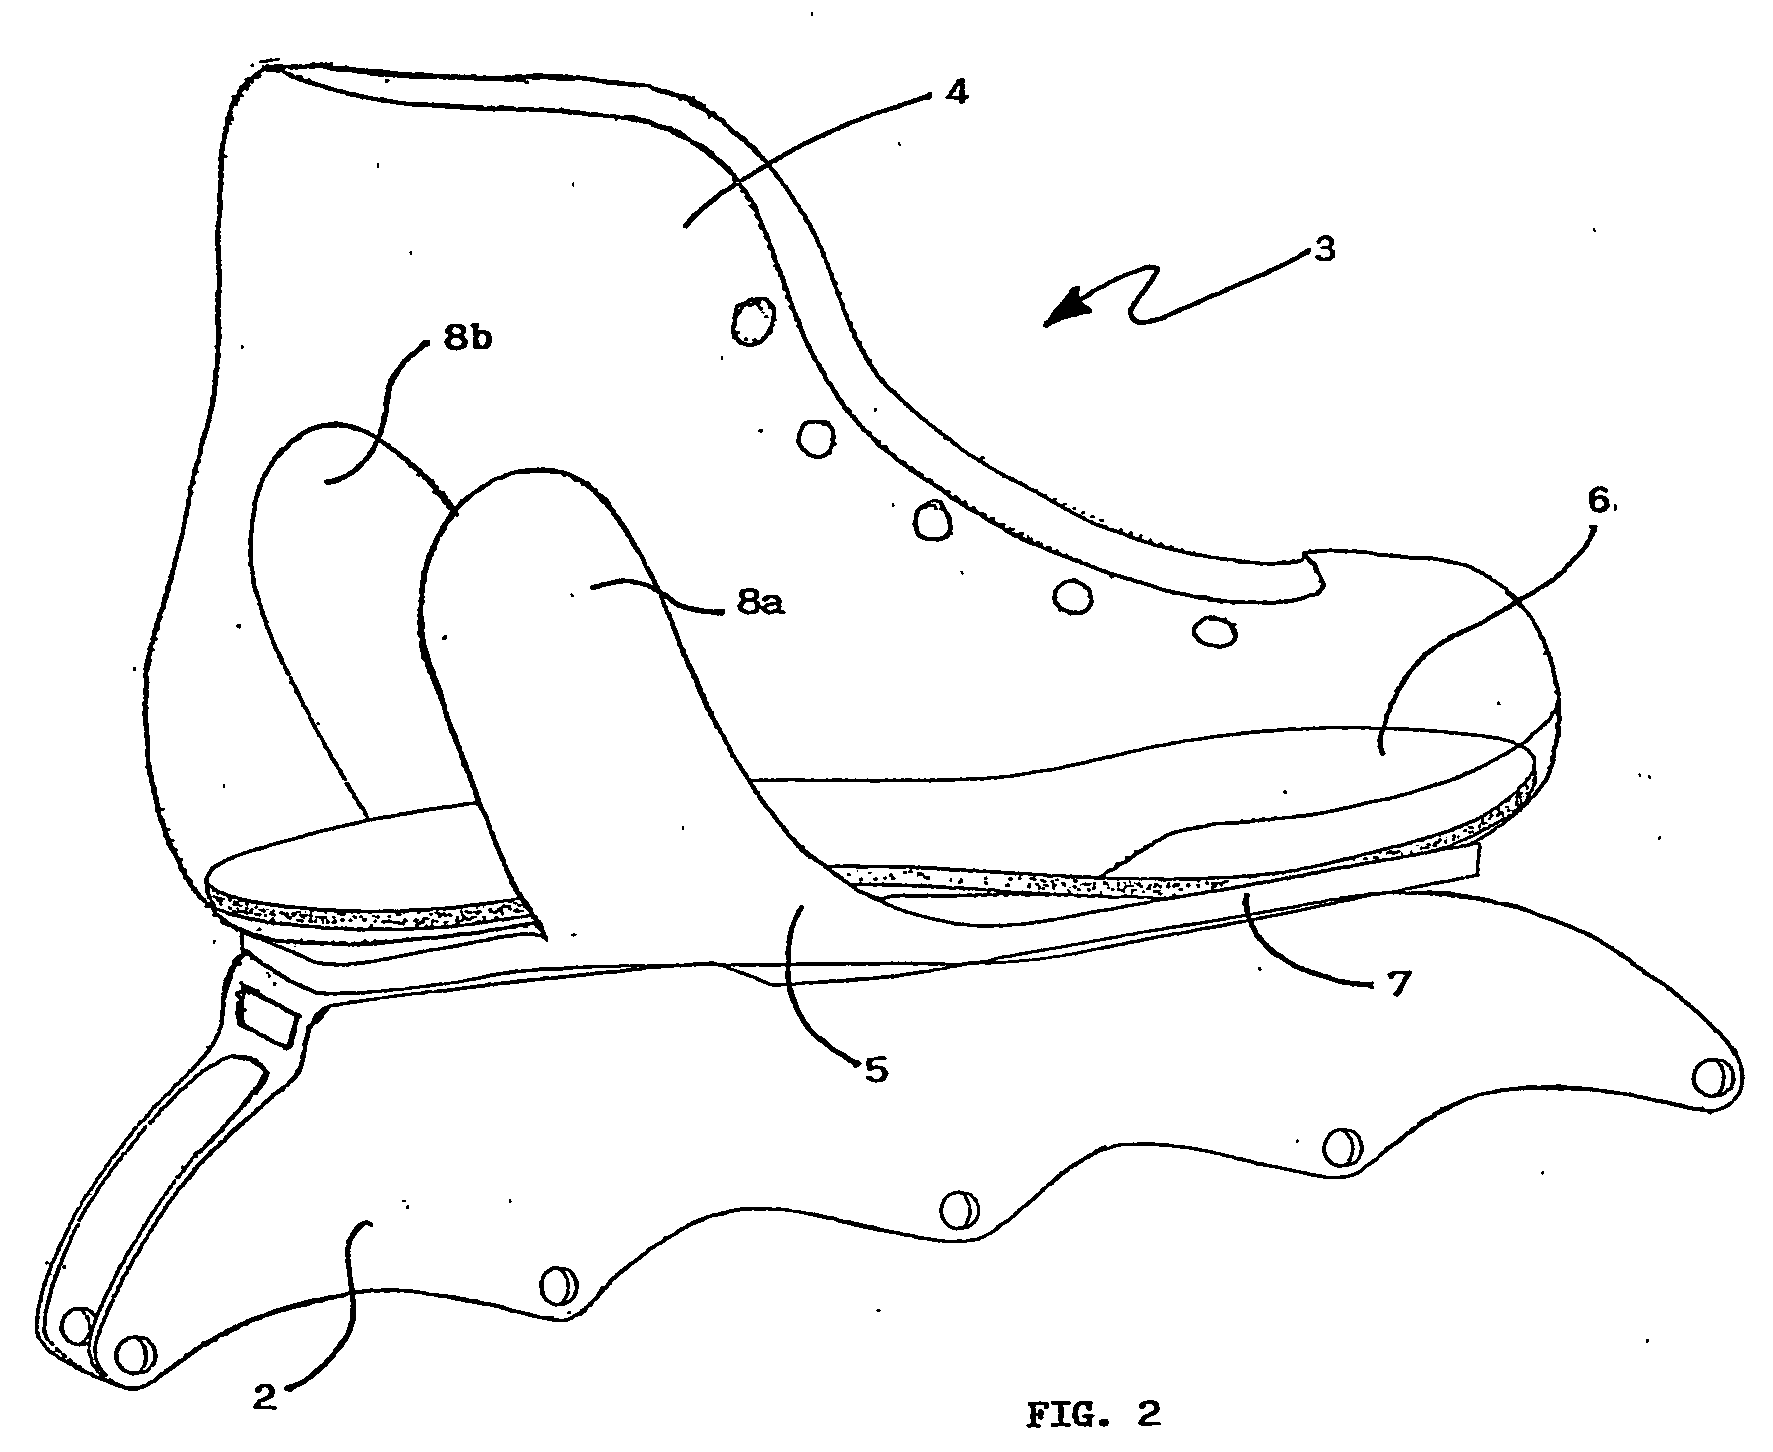 Structure of a sports footwear for roller skates or ice skates